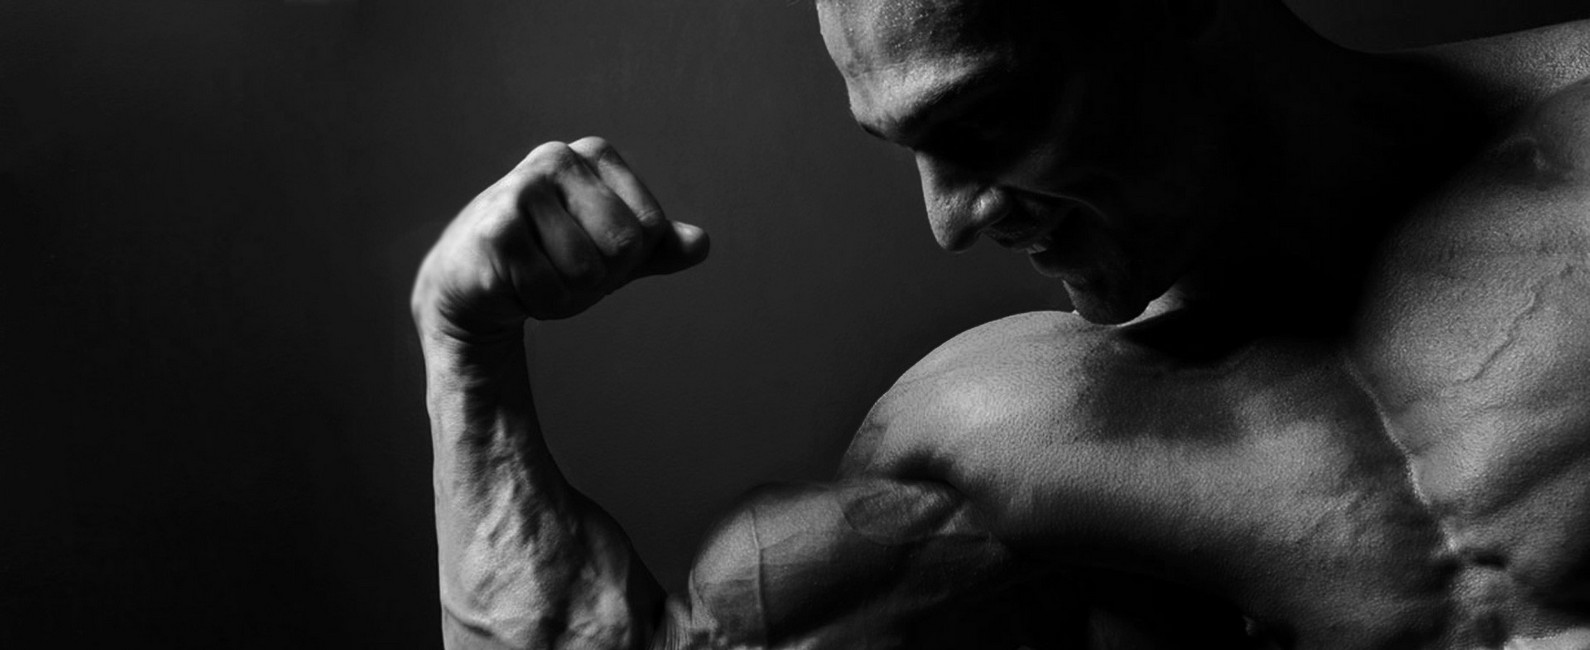 can anabolic steroids lower your immune system